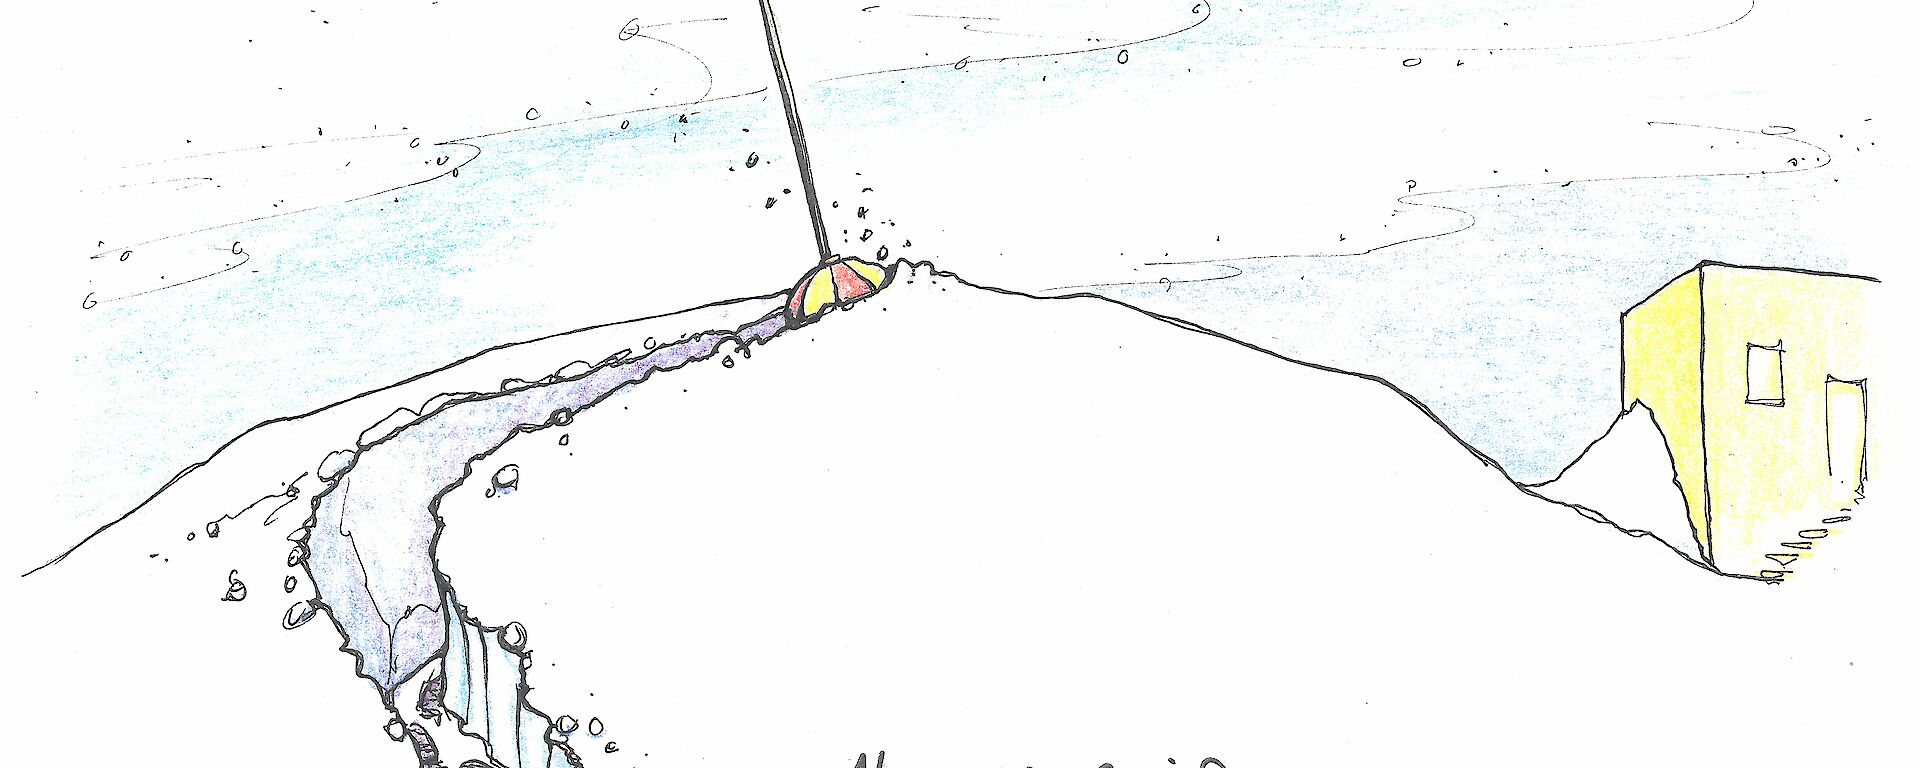 cartoon illustration showing an expectioner walking through deep snow drifts wearing a flag on her head